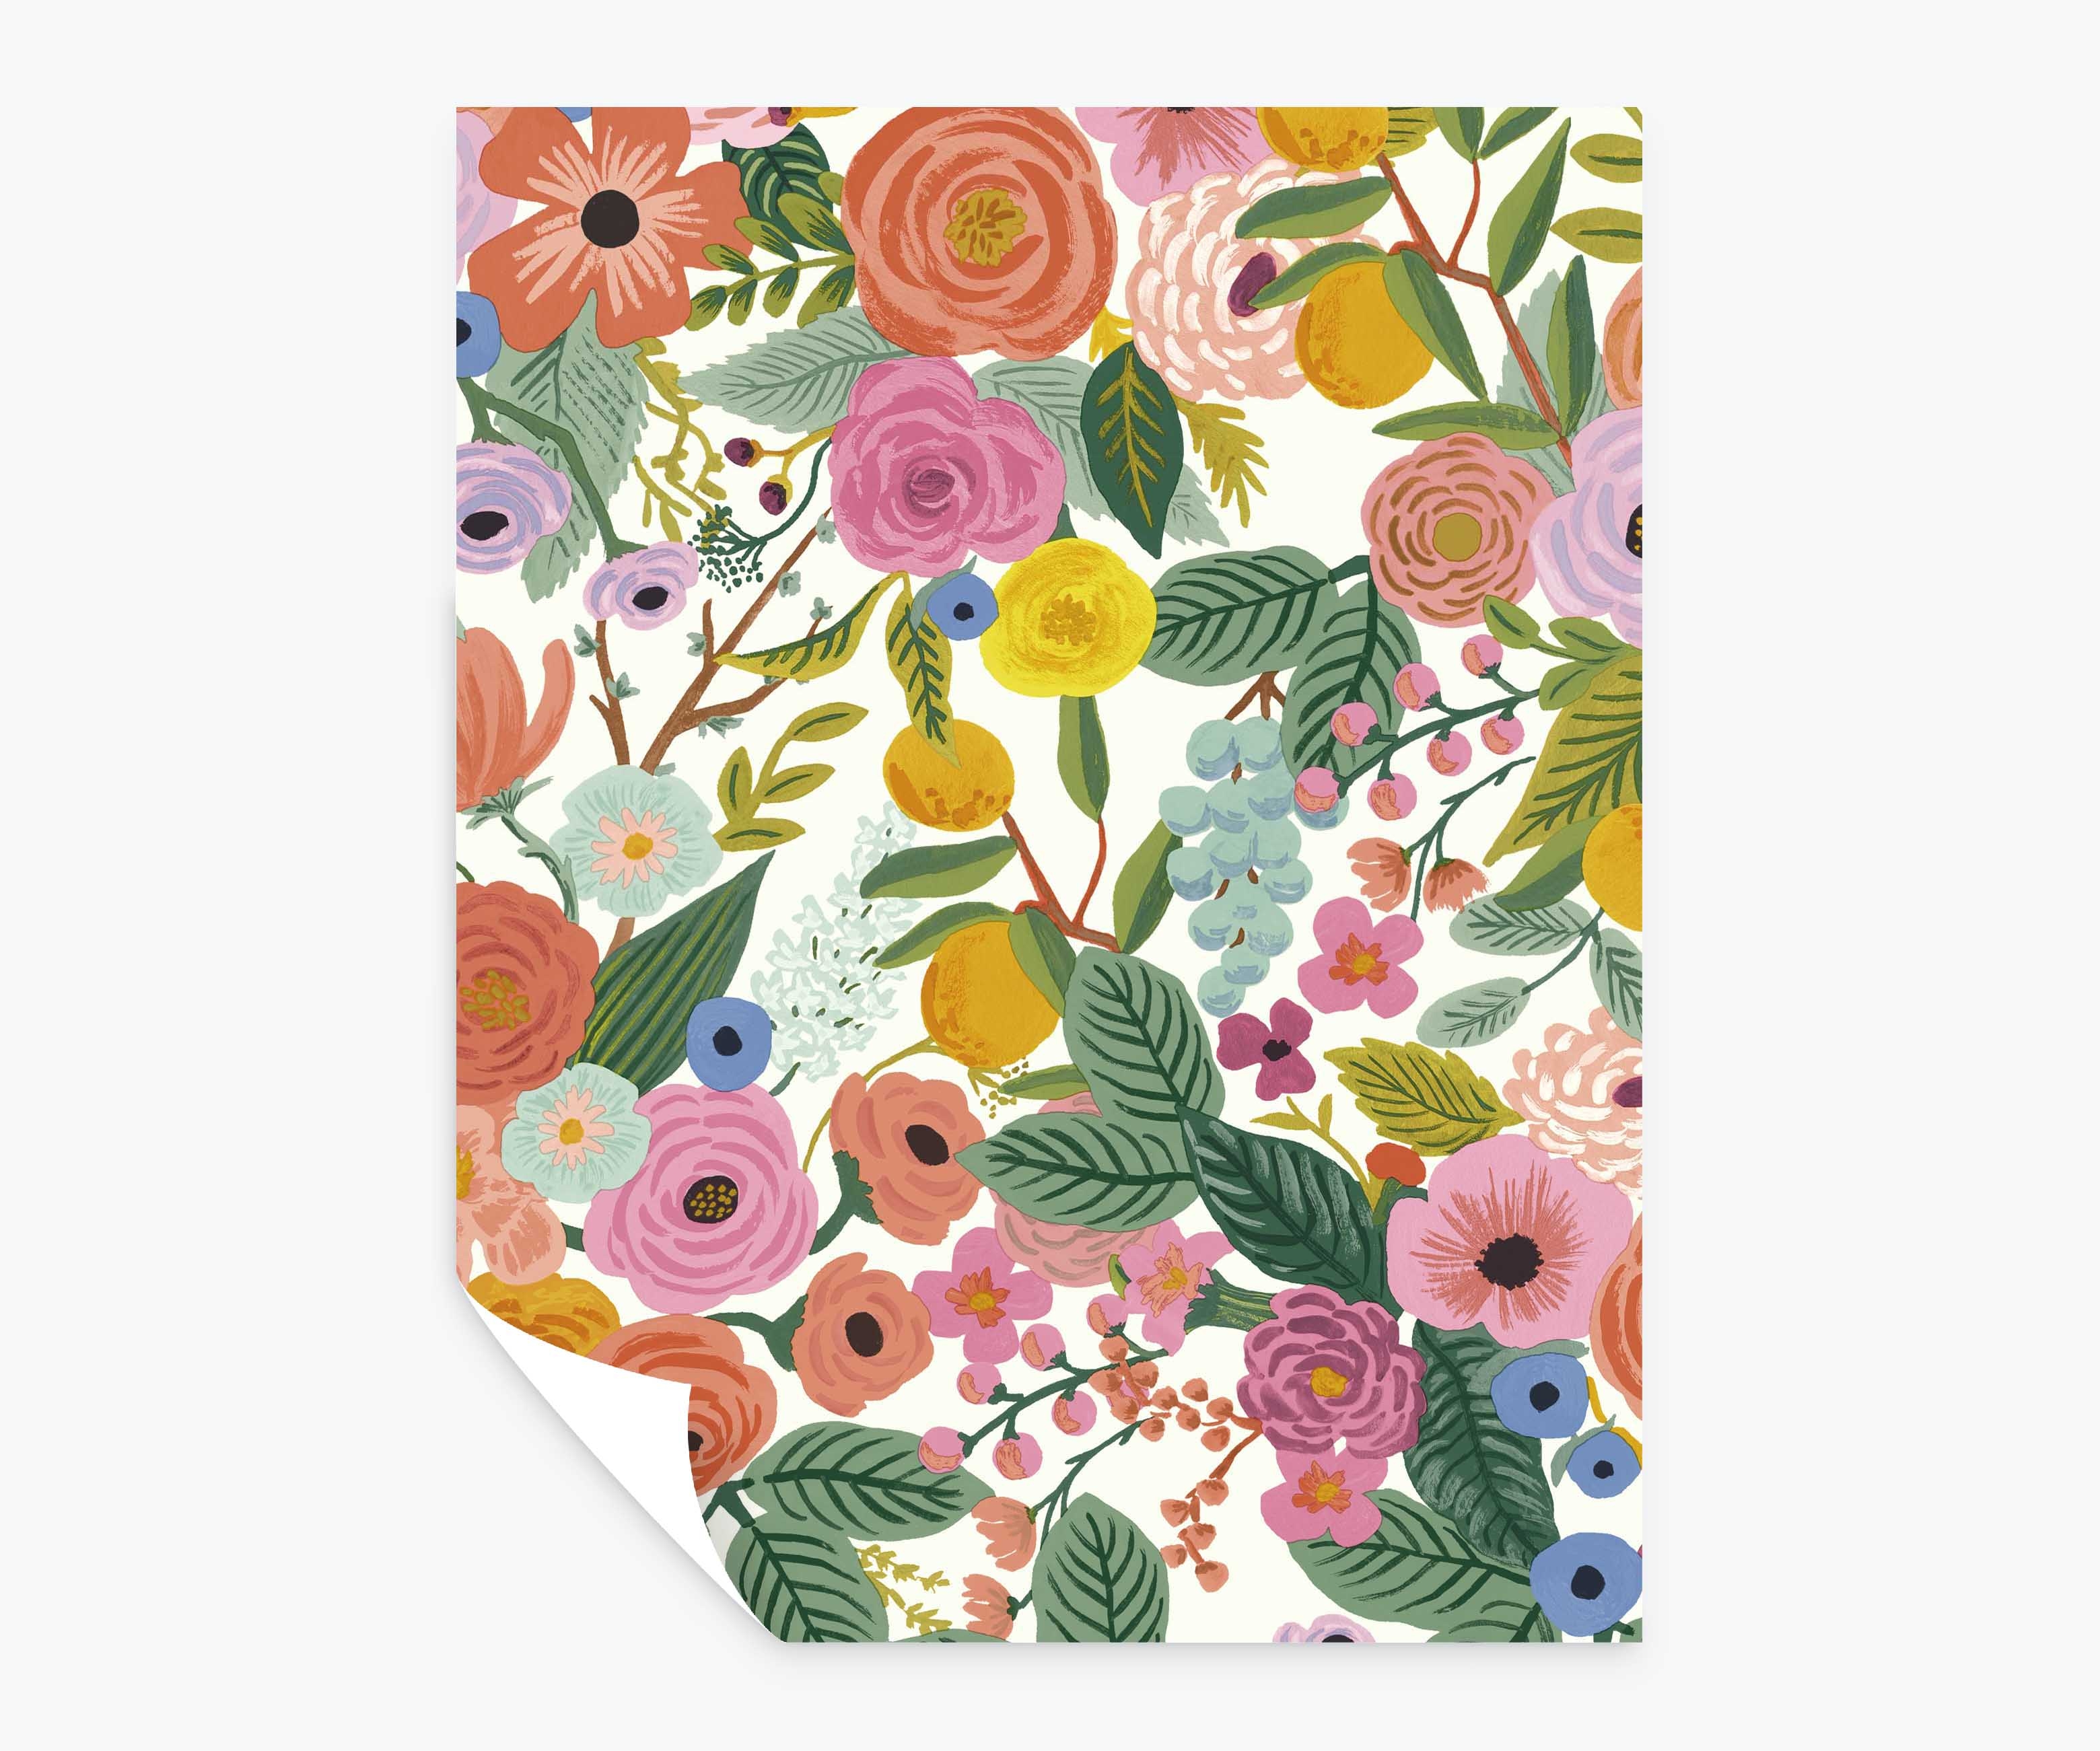 Rifle Paper Co. Garden Party Peel and Stick Wallpaper Rose